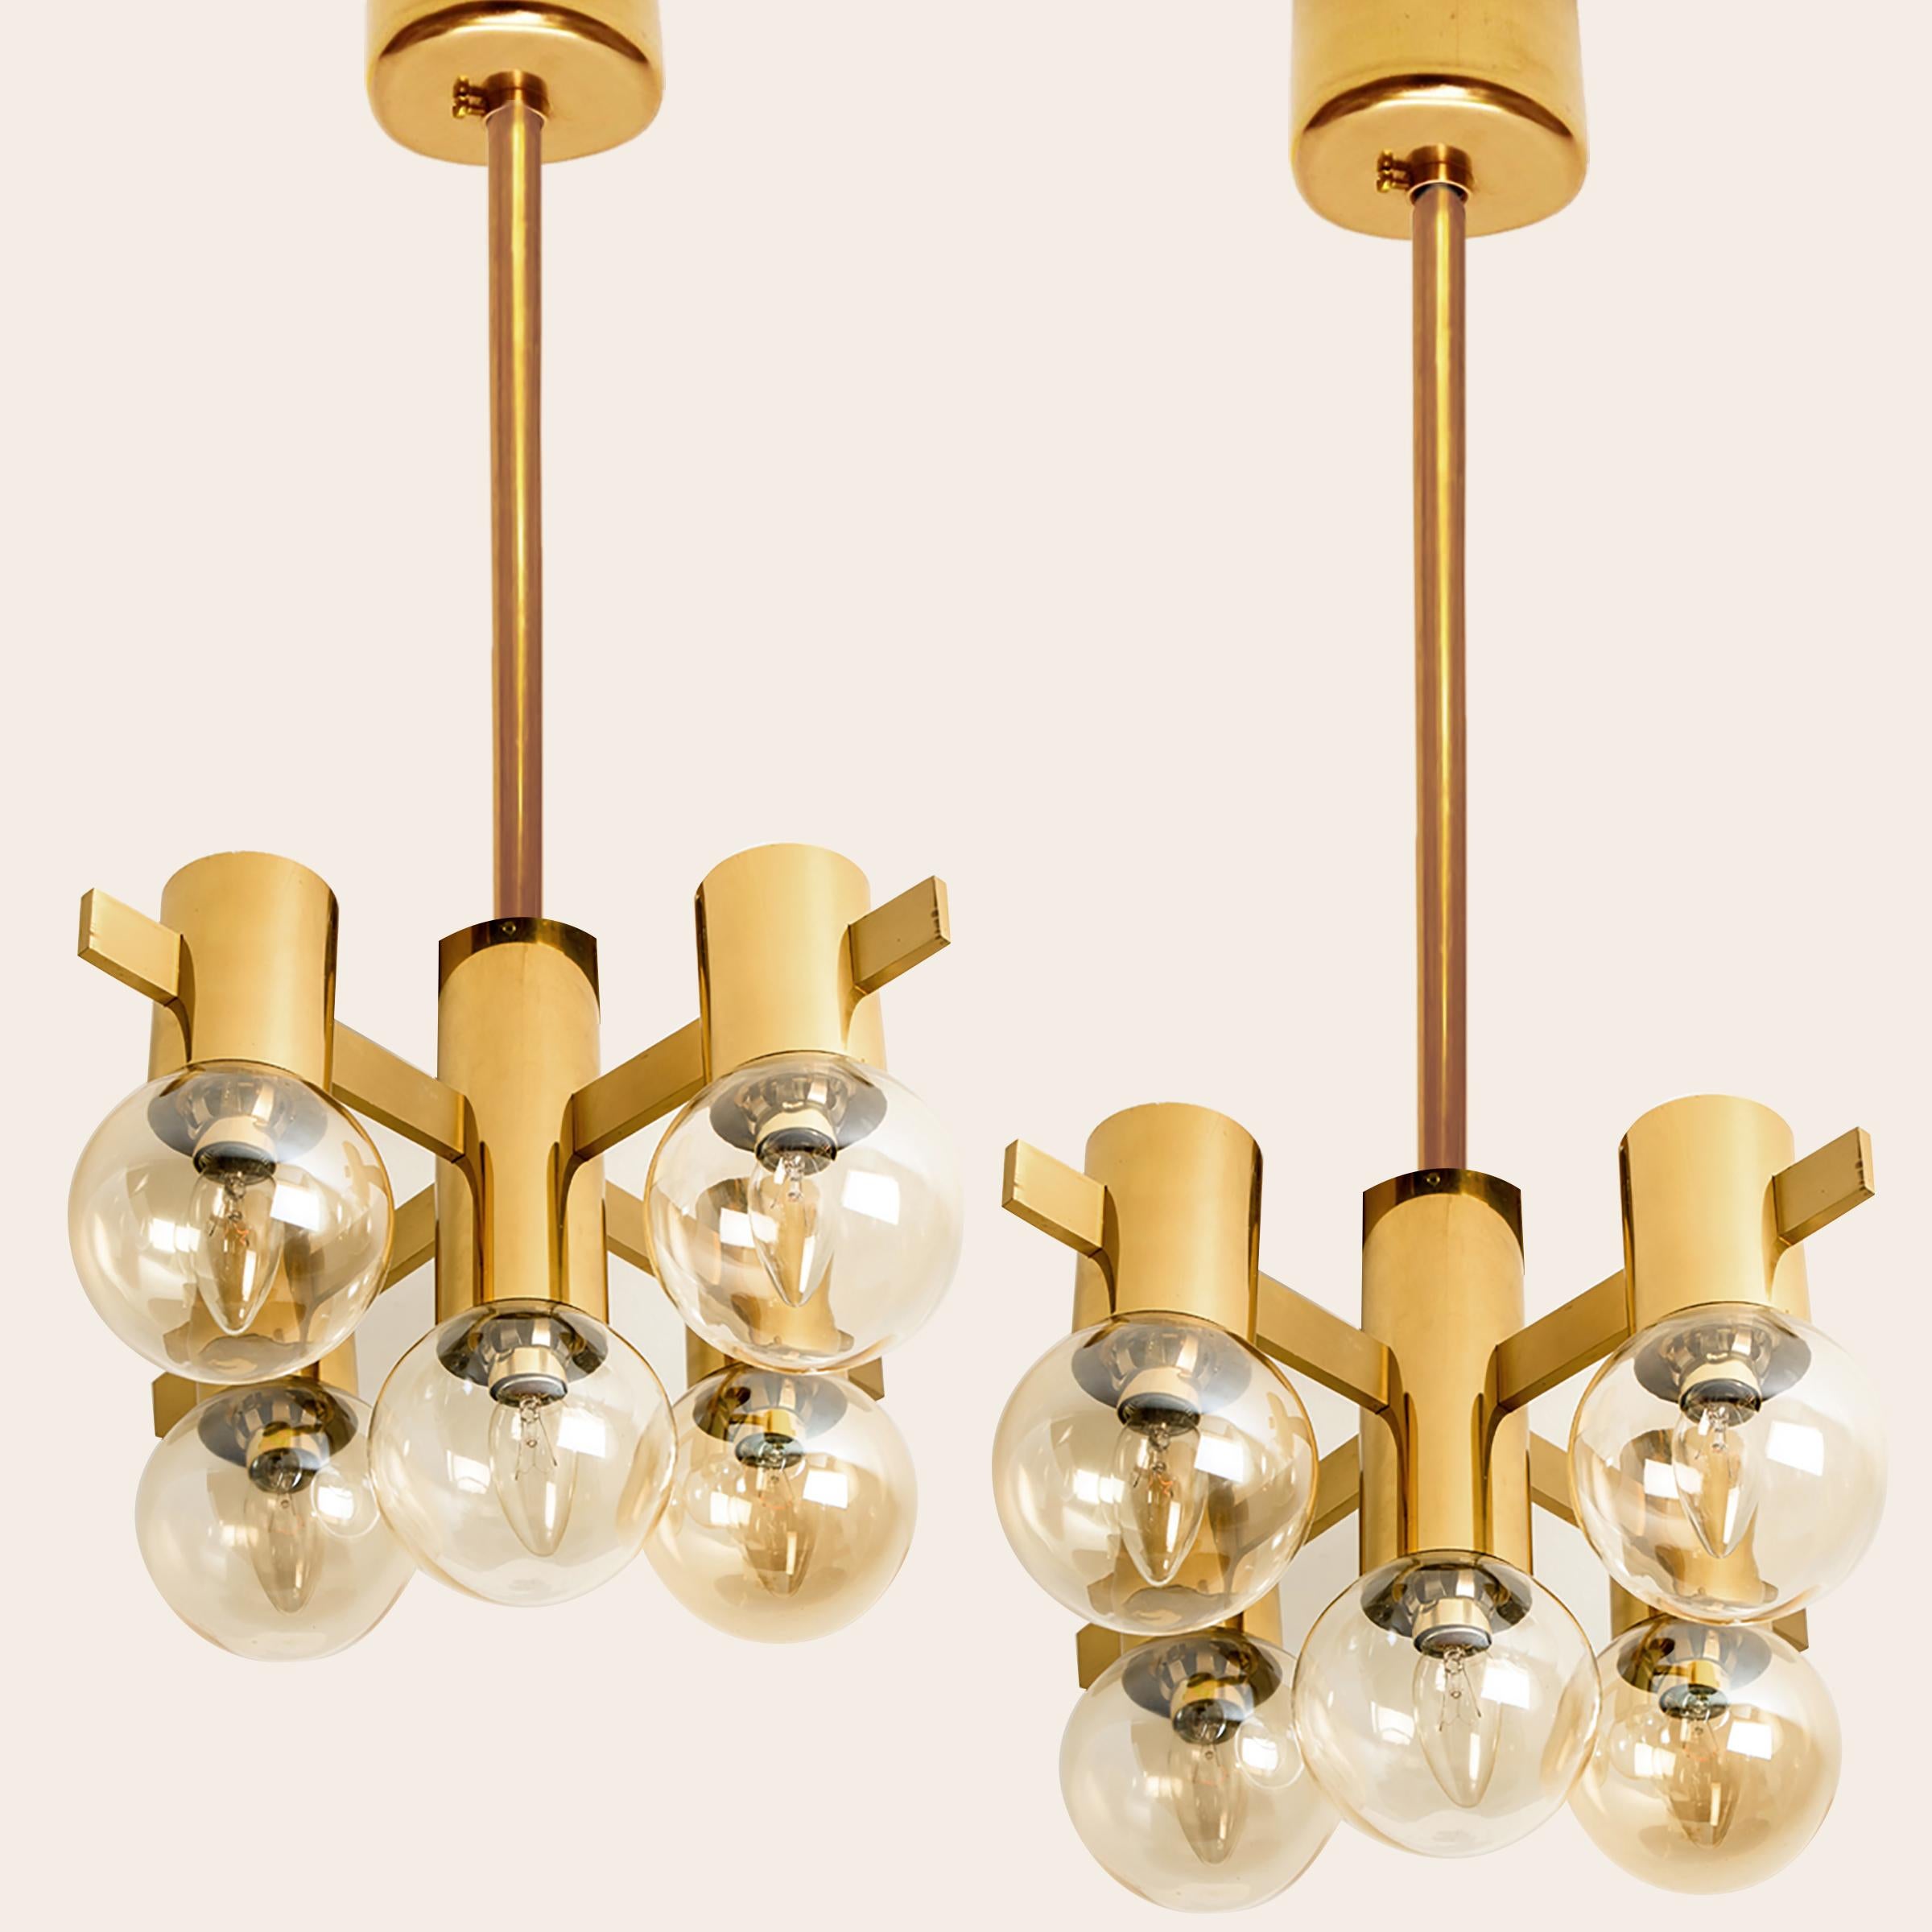 1 of the 3 Brass and Glass Light Fixtures in the Style of Jakobsson, 1960s For Sale 6